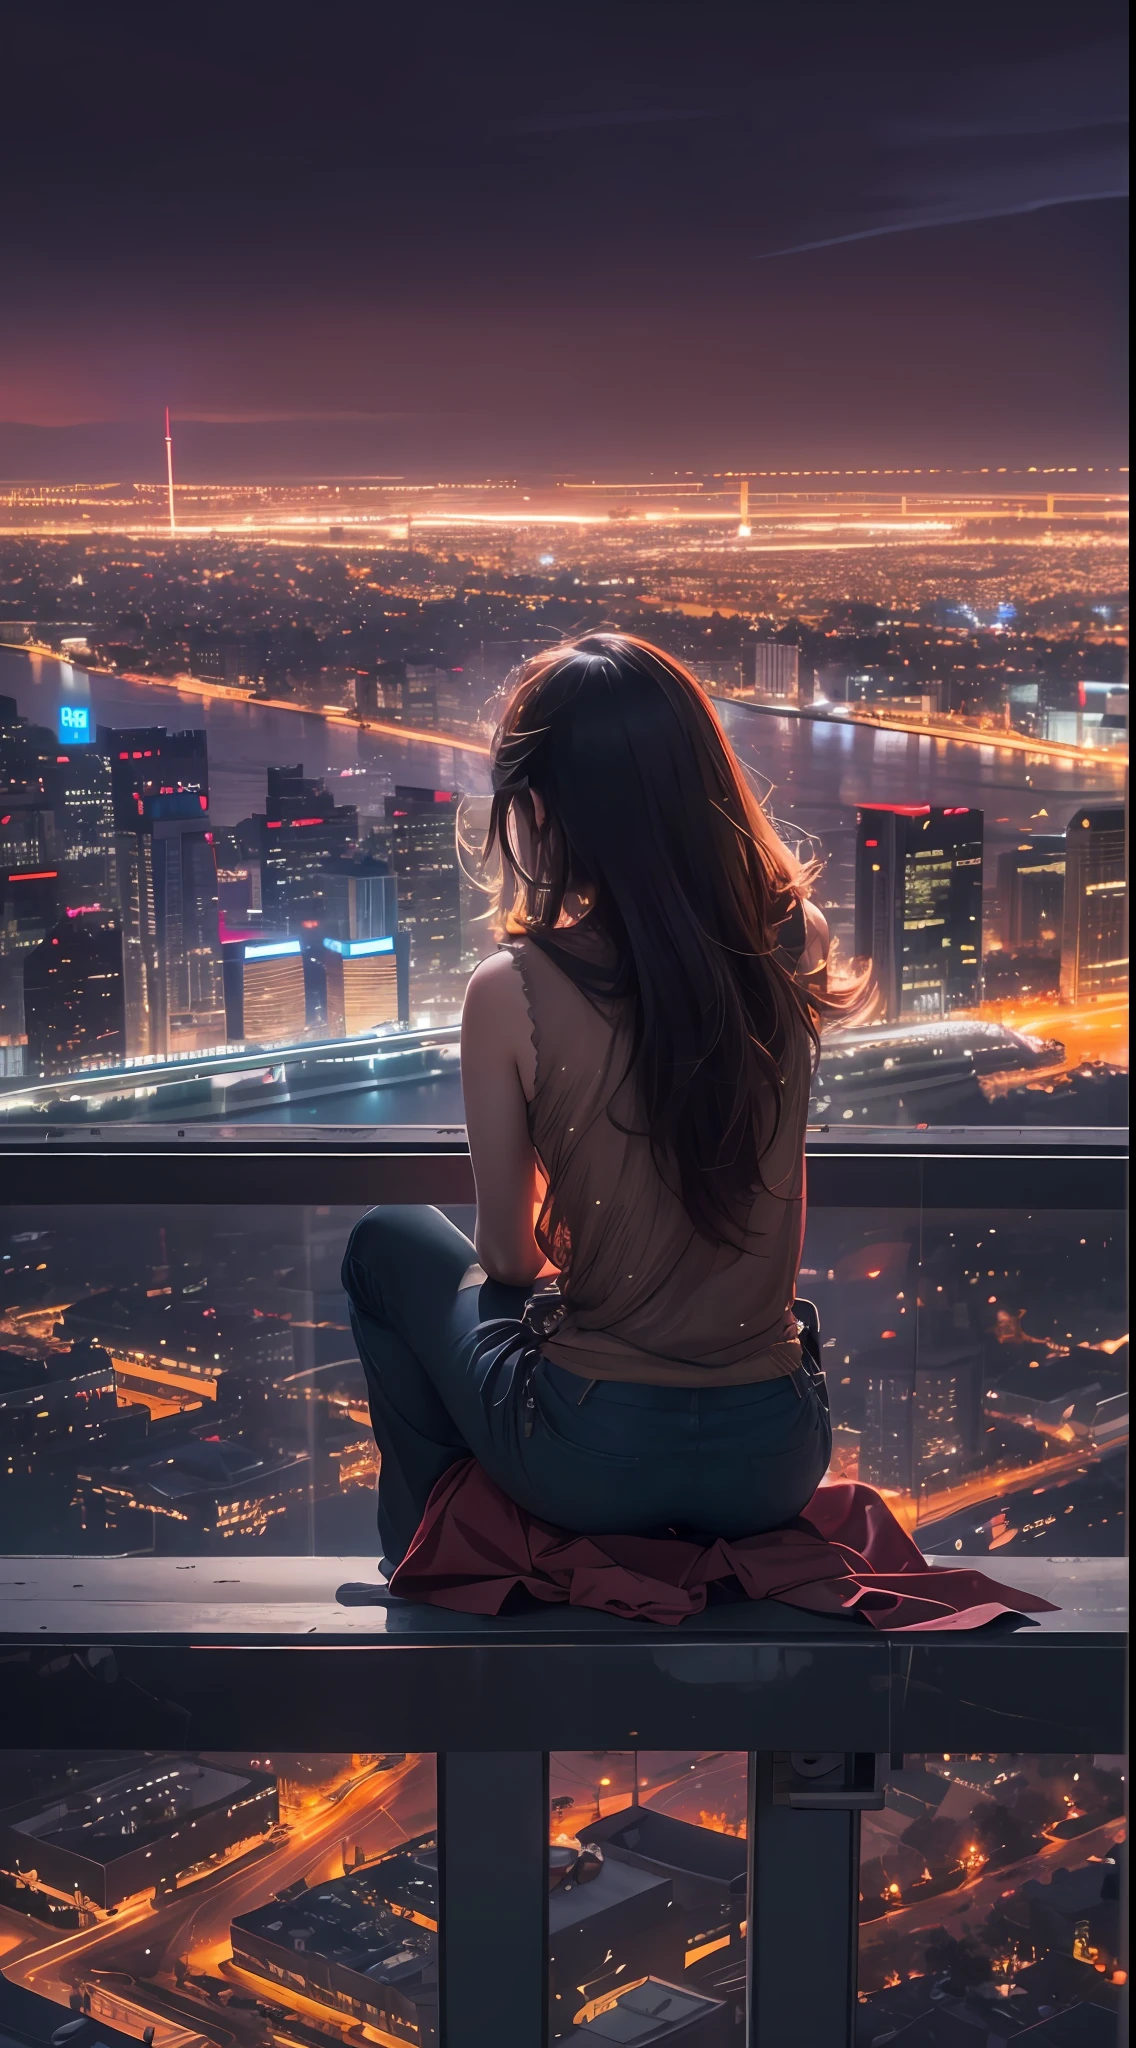 arafed woman sitting on ledge overlooking city lights at night, girl sitting on a rooftop, looking over city, overlooking a modern city, looking at the city, beautiful  girl, city lights in the background, girl watching sunset, night lights, lights on, sitting on a skyscraper rooftop, by Niko Henrichon, night - time, night-time